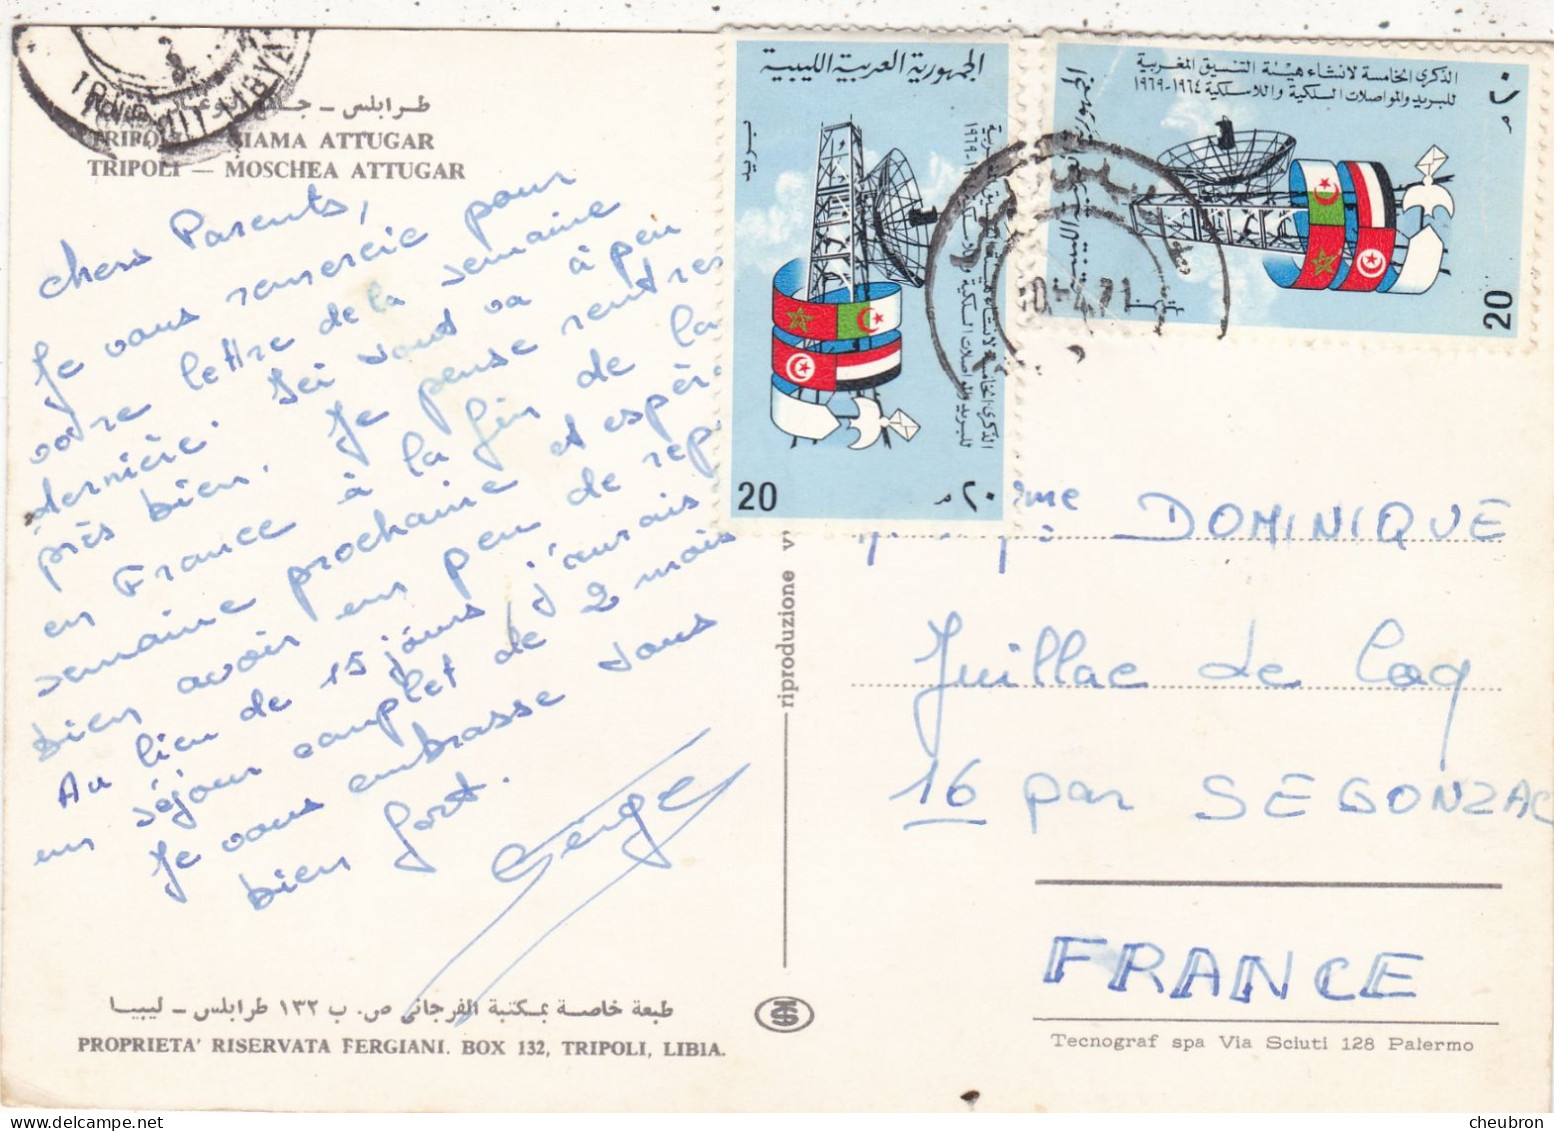 LIBYE. " MOSCHEA ATTUGAR ". STATION SERVICE AGIP. 403 POEUGEOT FAMILIALE. .ANNEE 1971 + TEXTE + TIMBRES - Libye